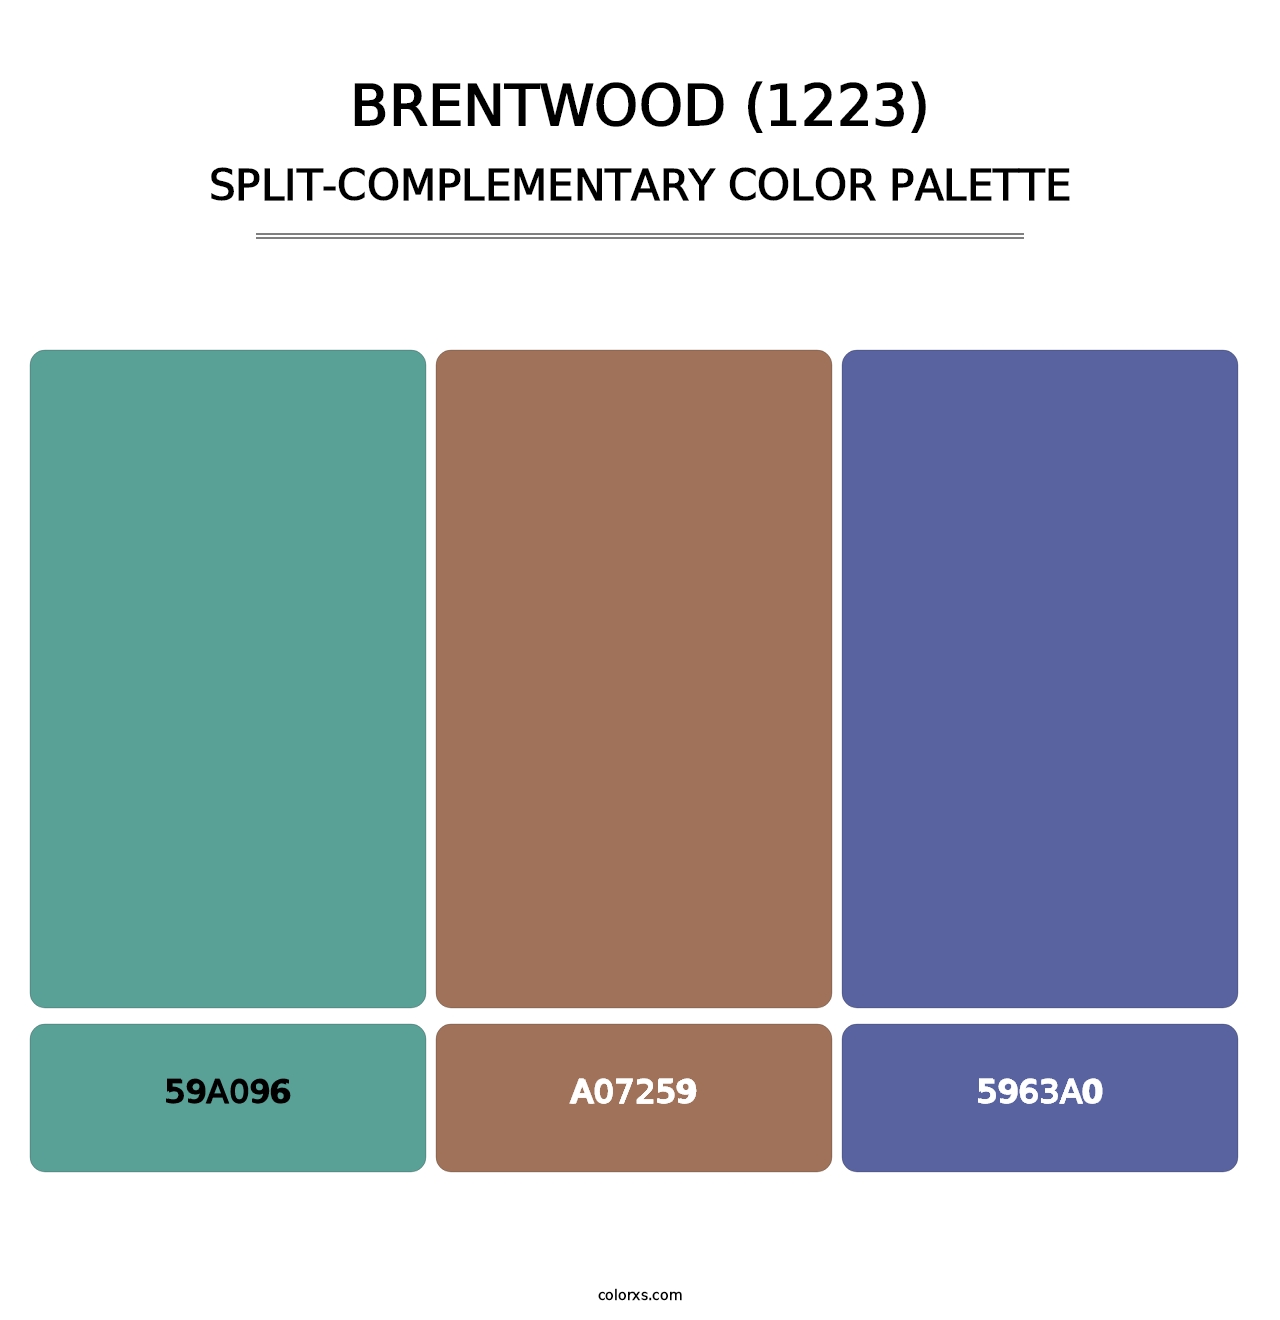 Brentwood (1223) - Split-Complementary Color Palette